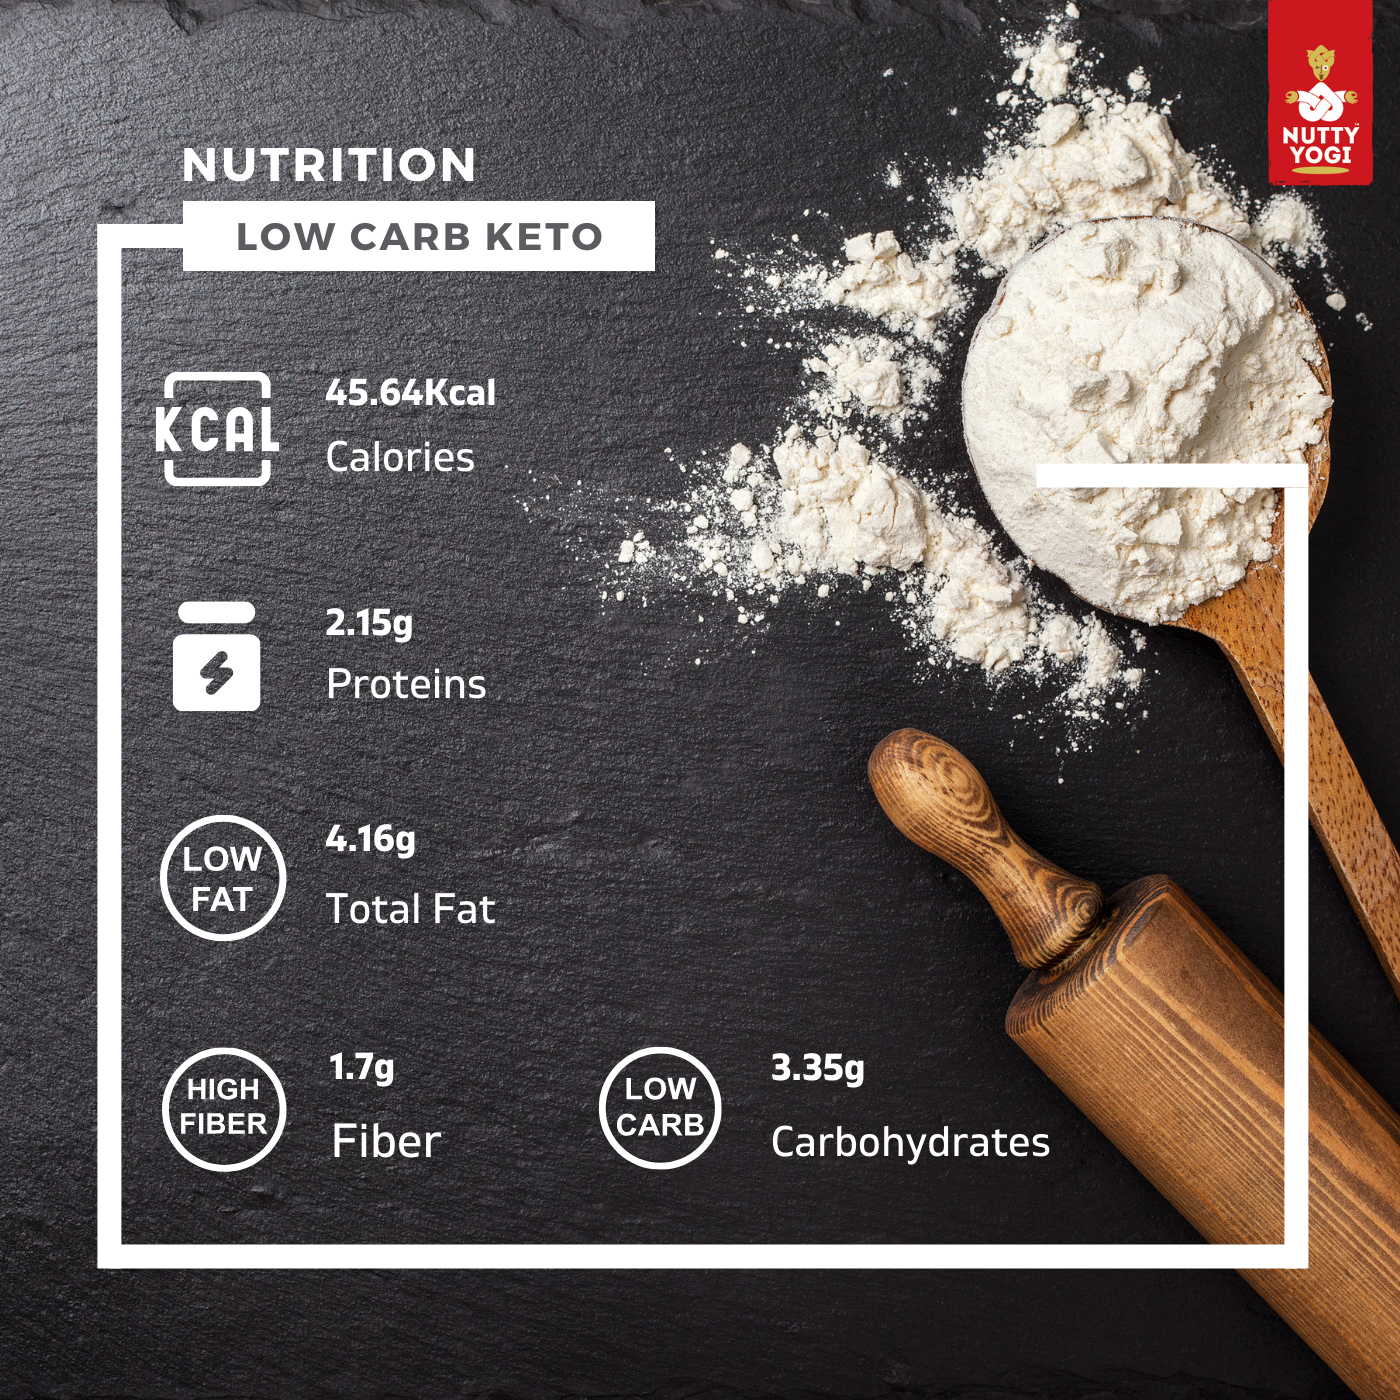 Nutty Yogi Low Carb Keto Flour Pack of Four | Keto Friendly | Gluten Free | Low Gi Baking, Indian Bread | Good for Diet | Freshly made in small batches 400x4 = 1600 Gm